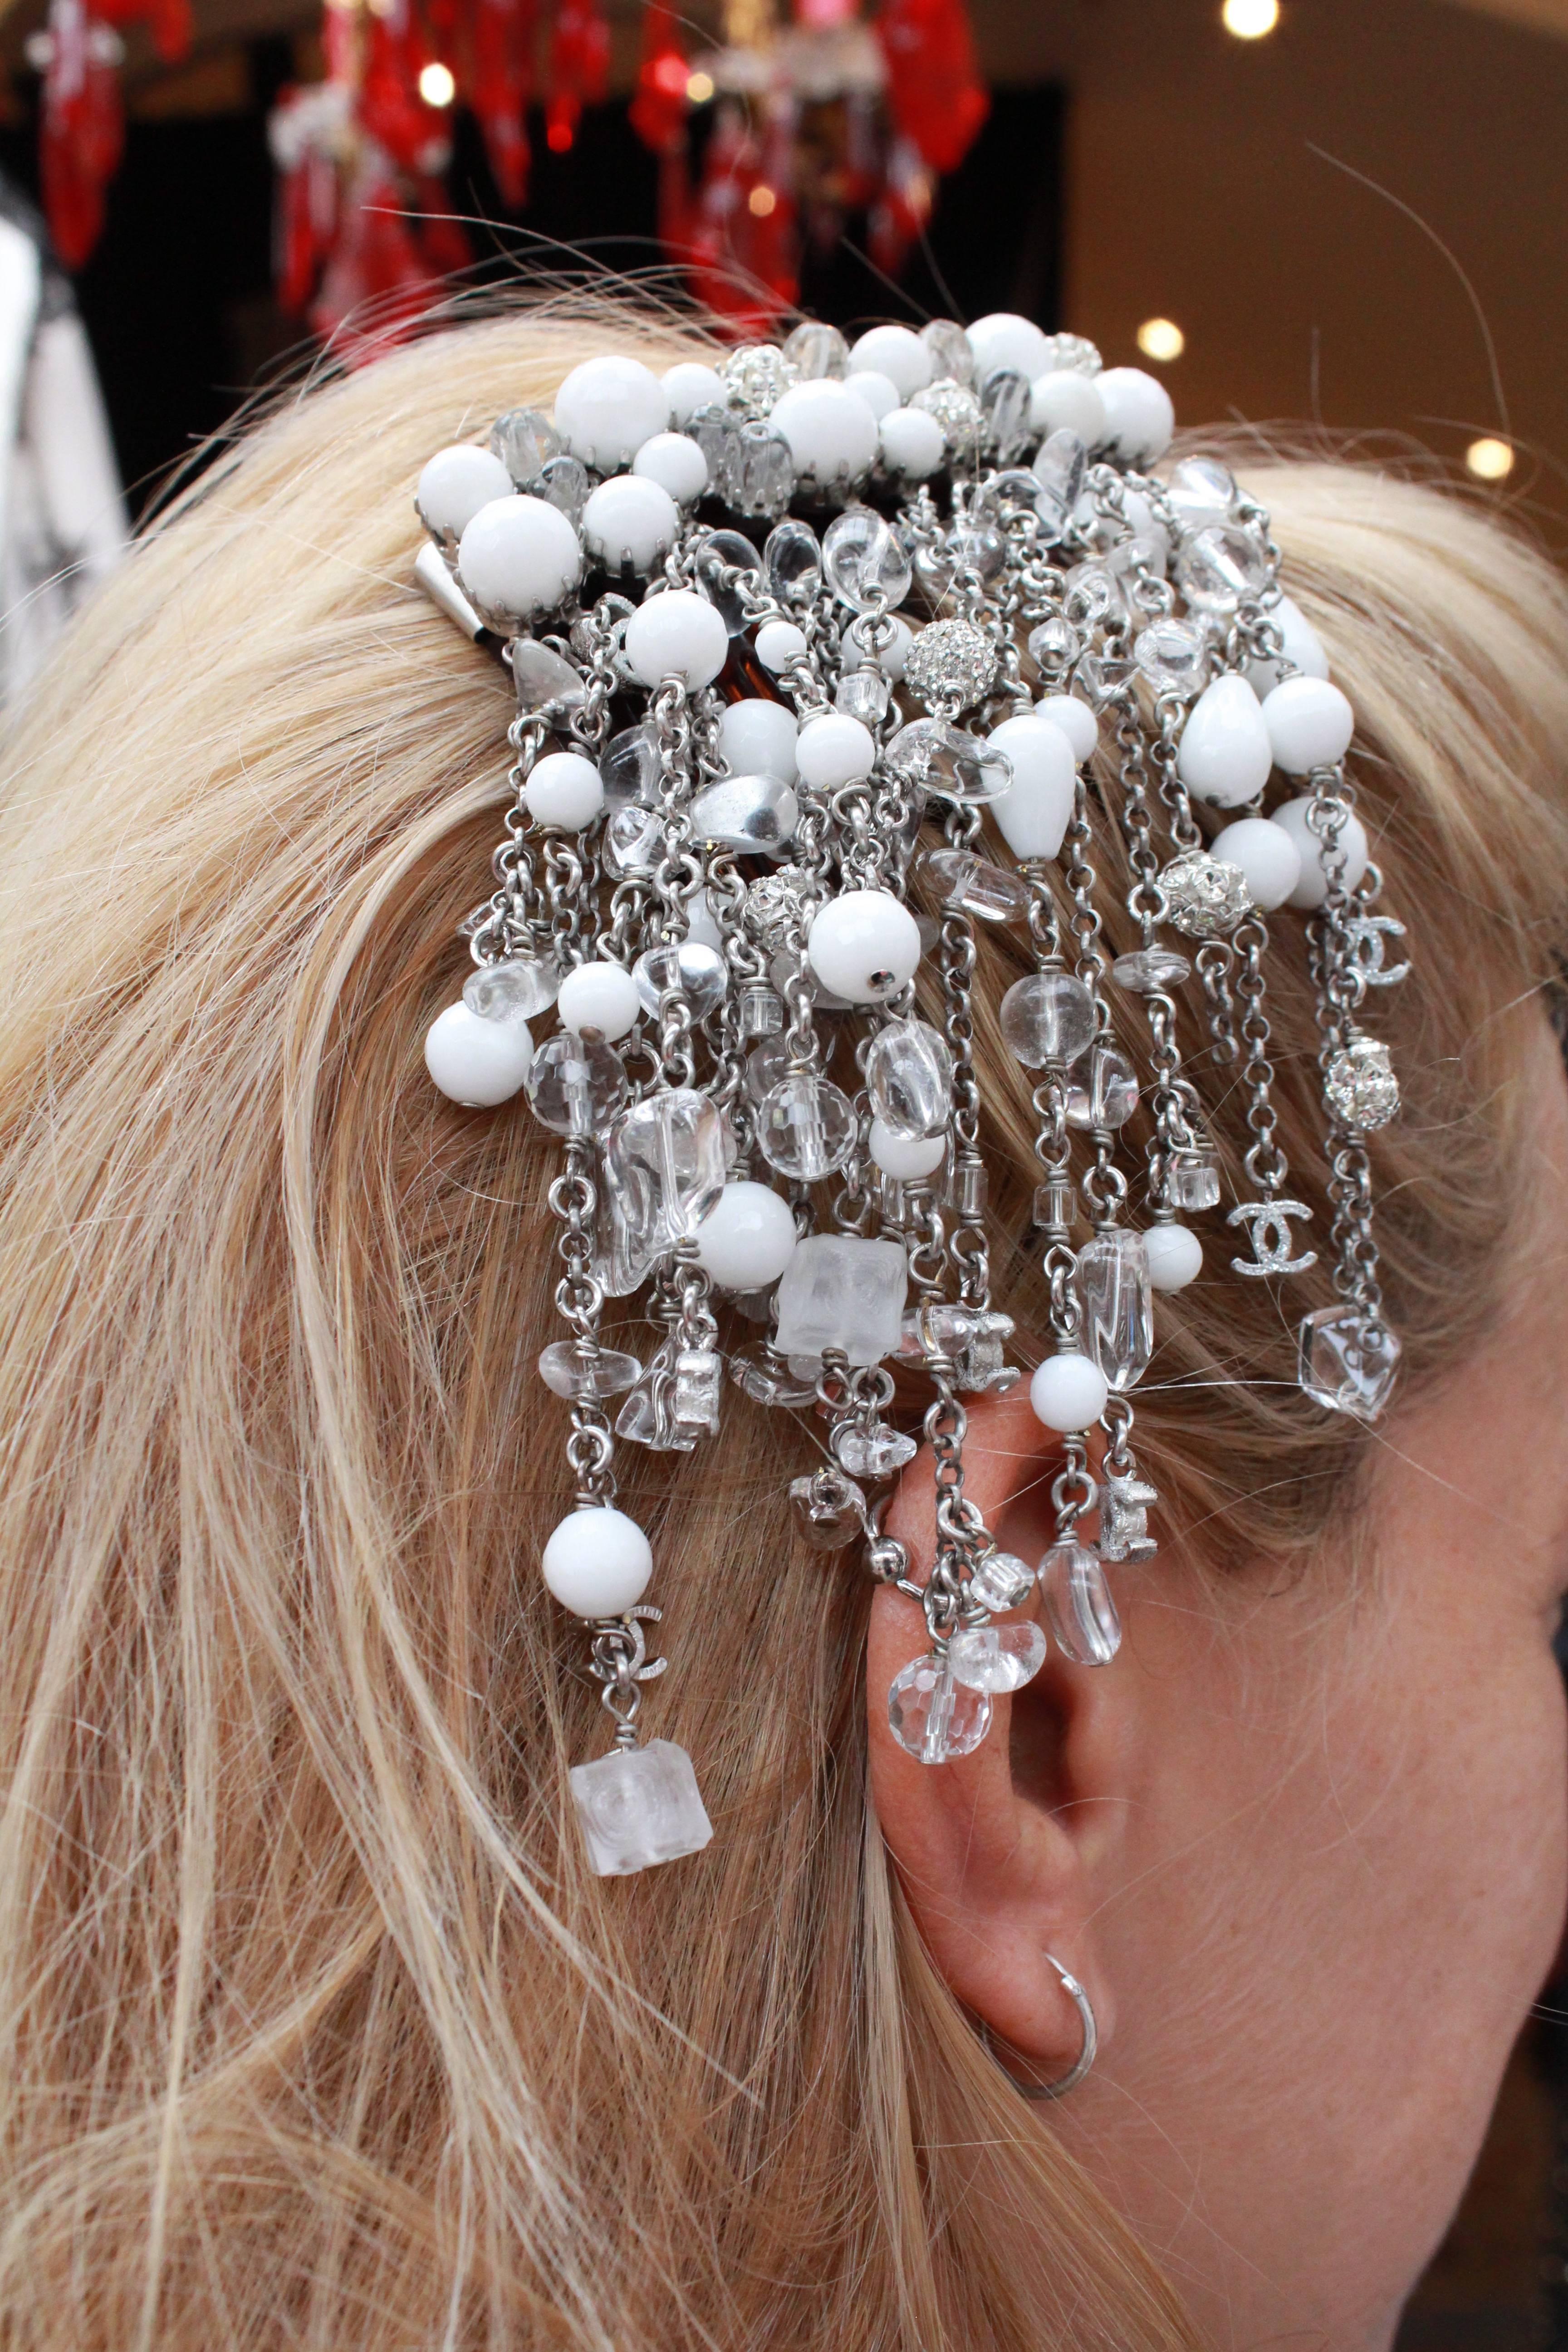 Black 2010s Chanel hair comb embellished with white beads, crystal and rhinestones